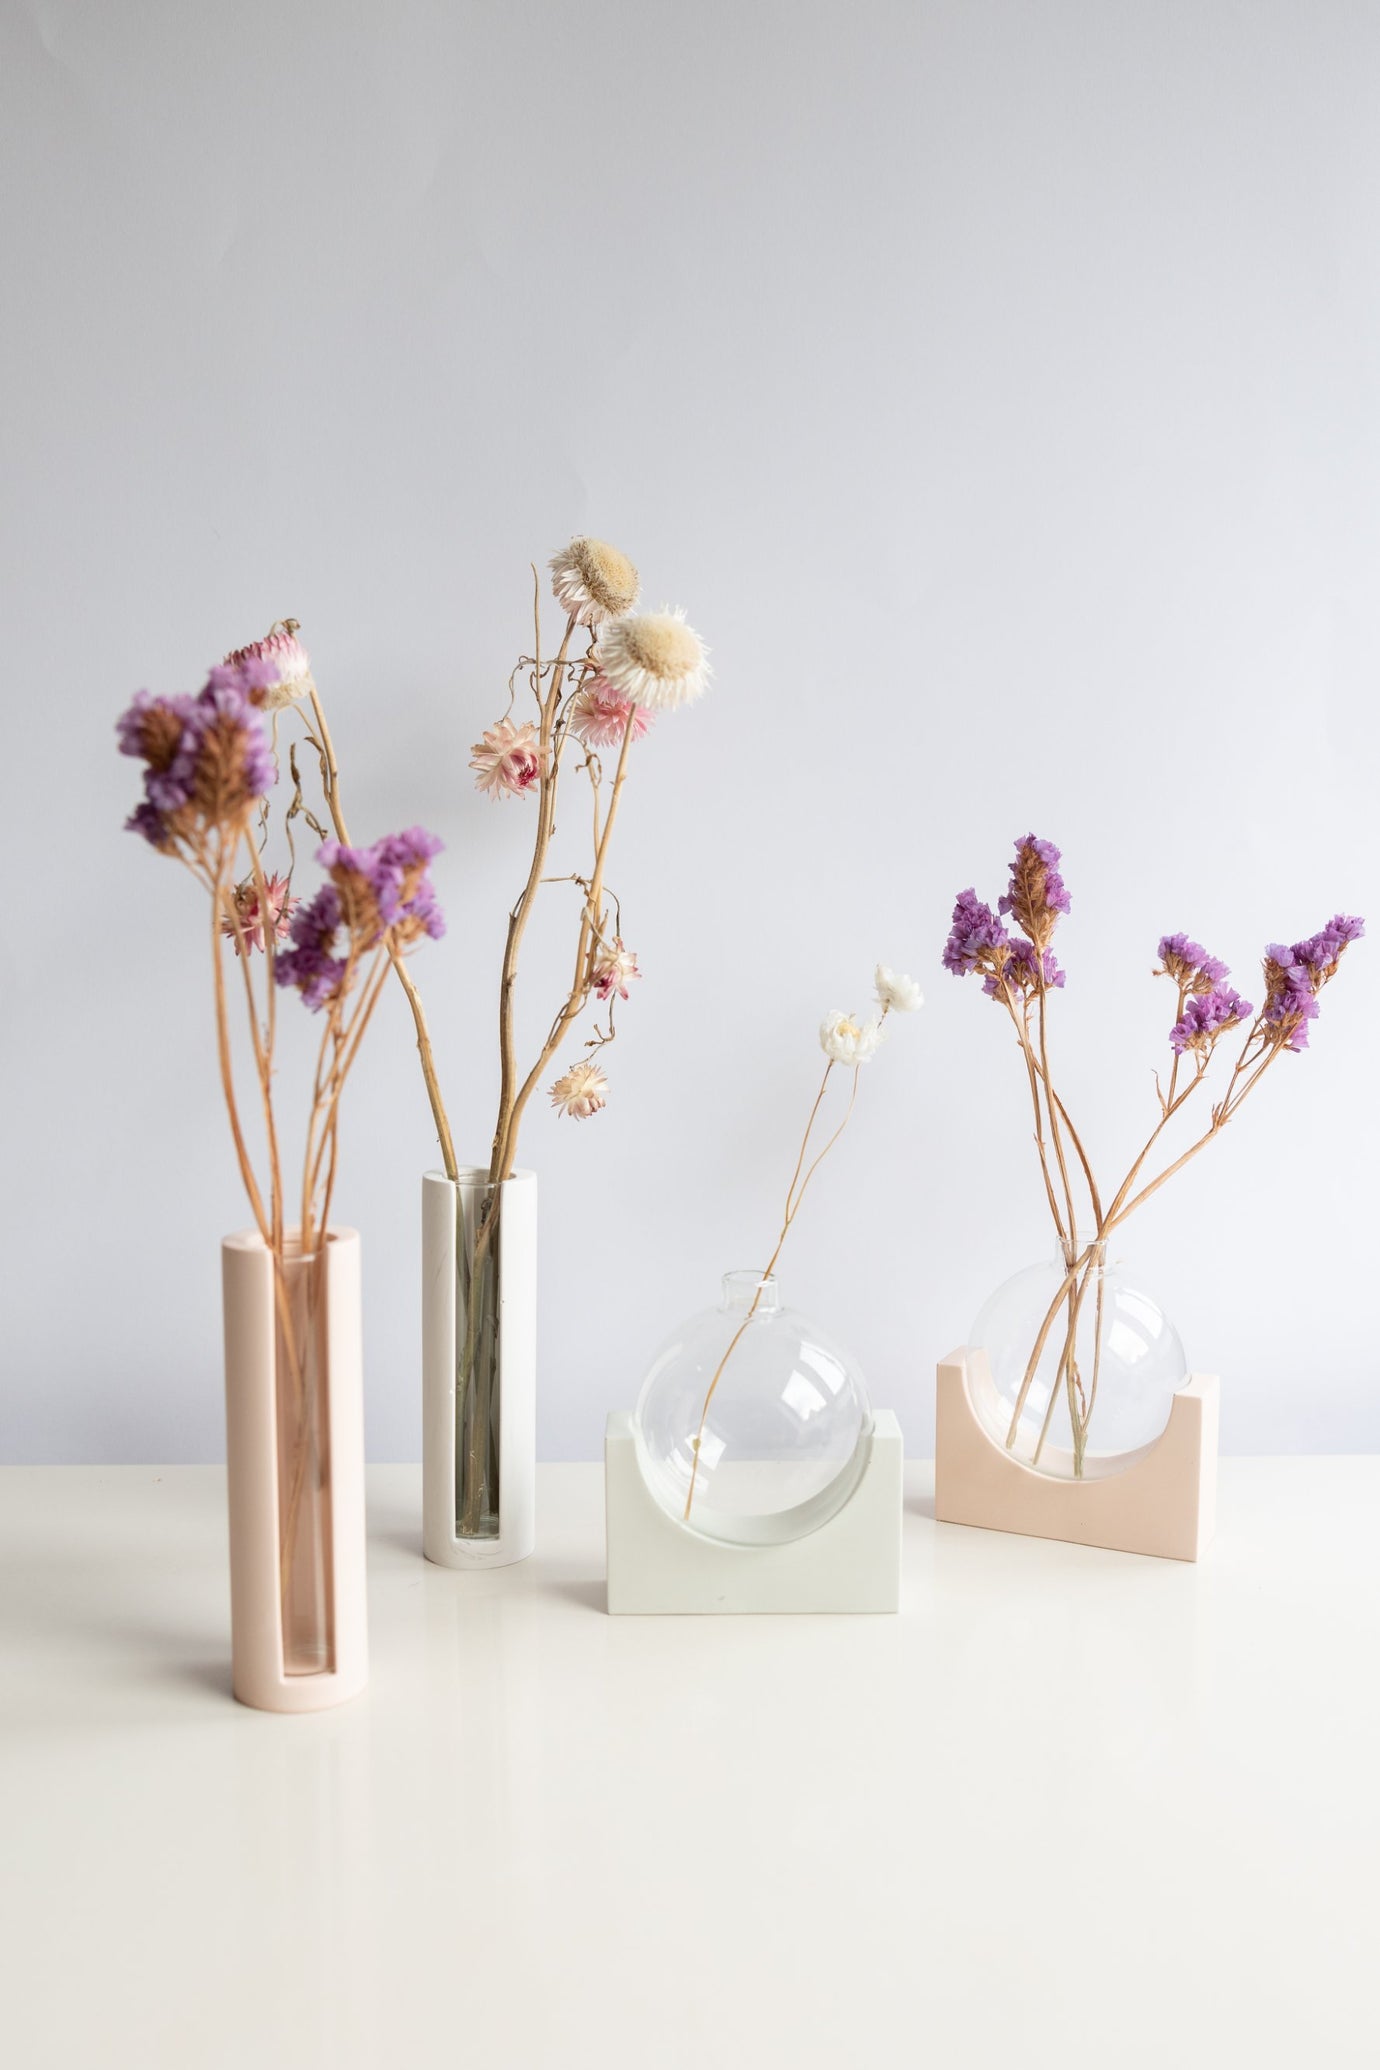 Lily & June vases